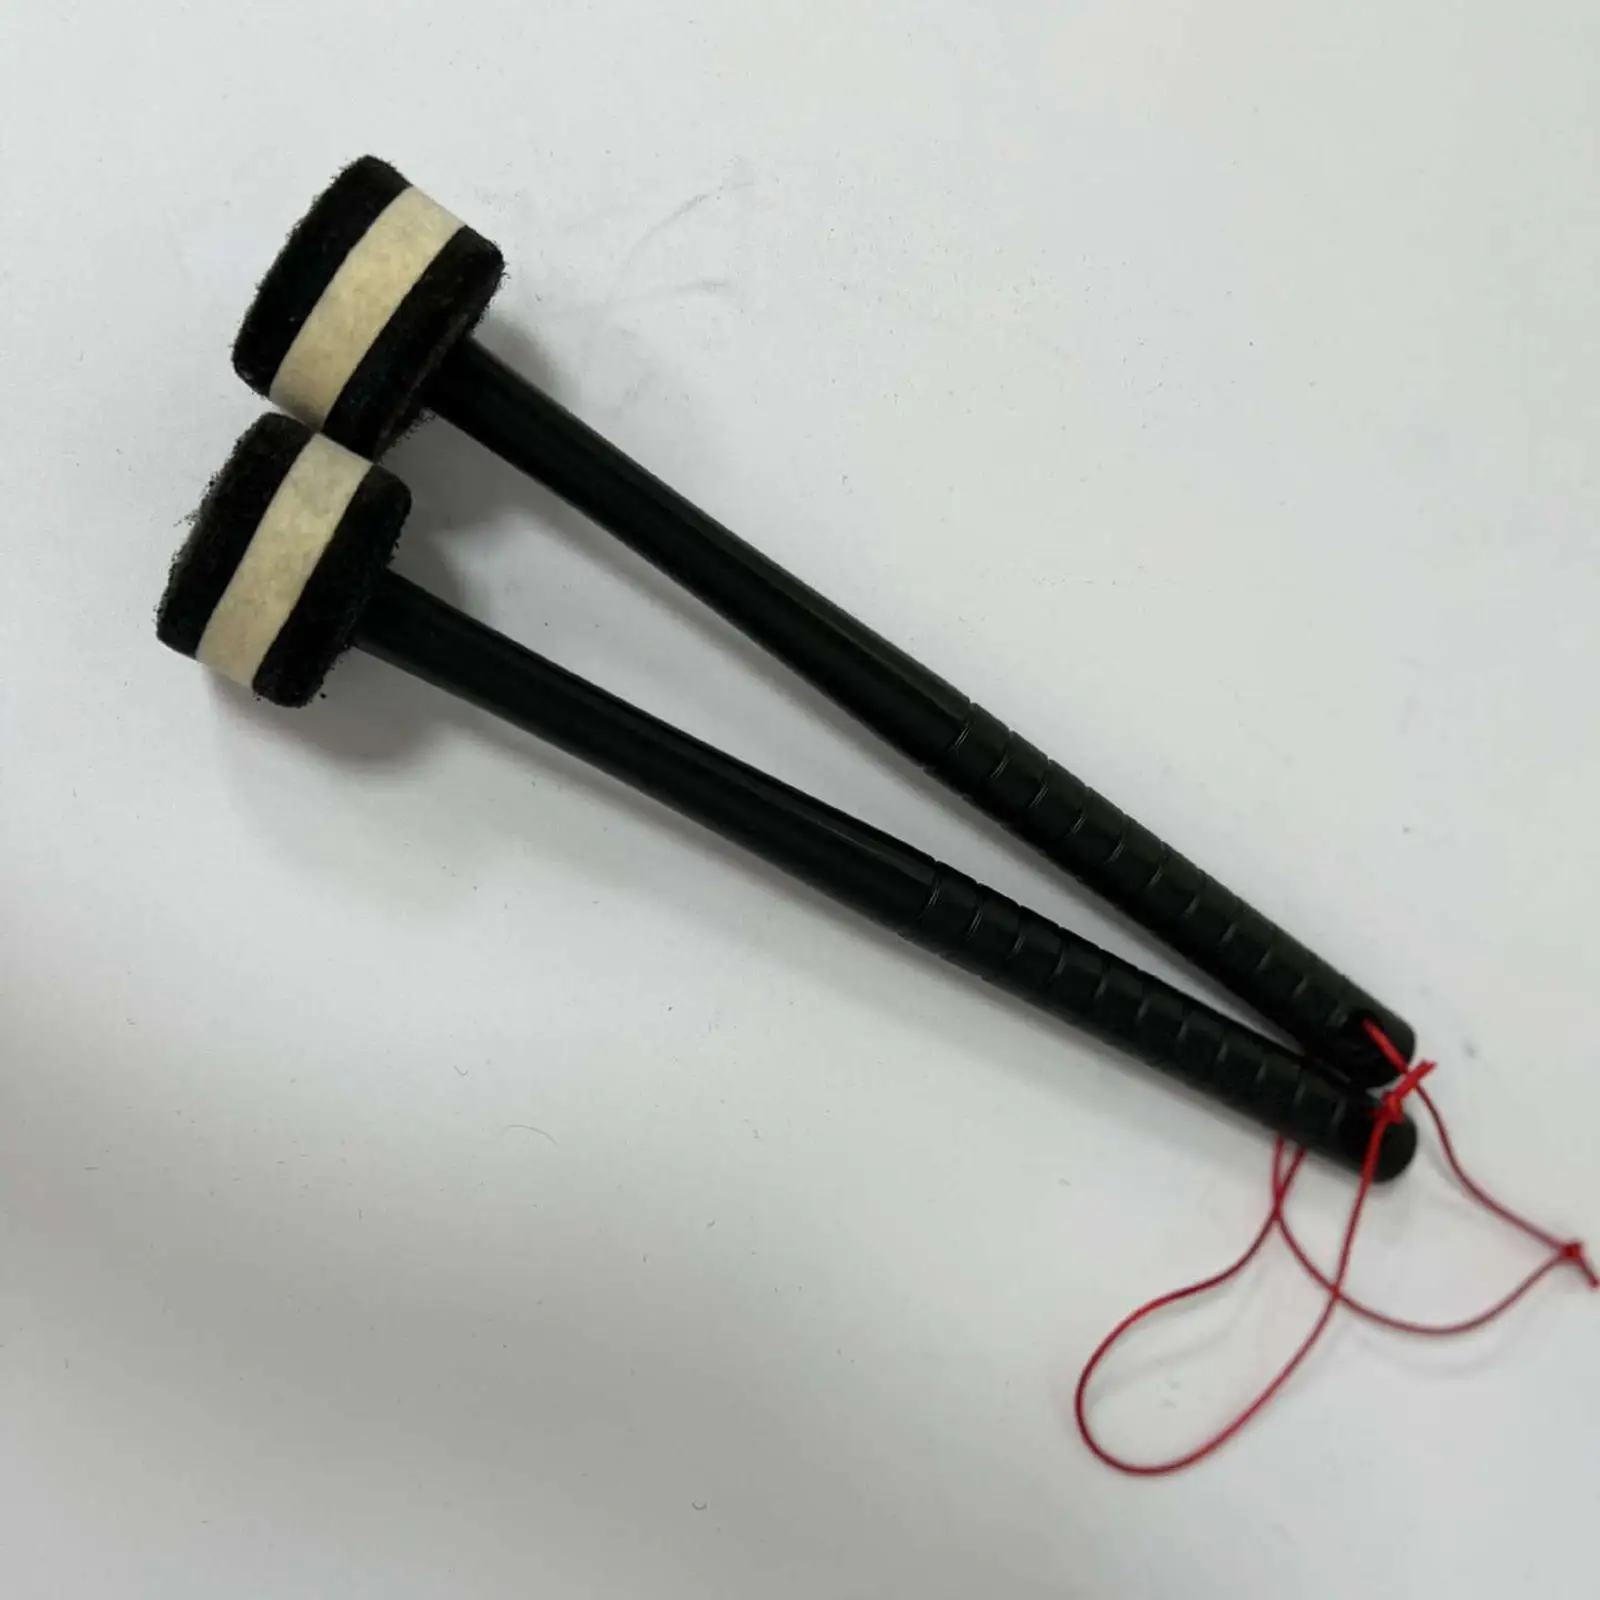 2 Pieces Percussion Xylophone Bell Mallets for Gong Woodblock Drum Bells